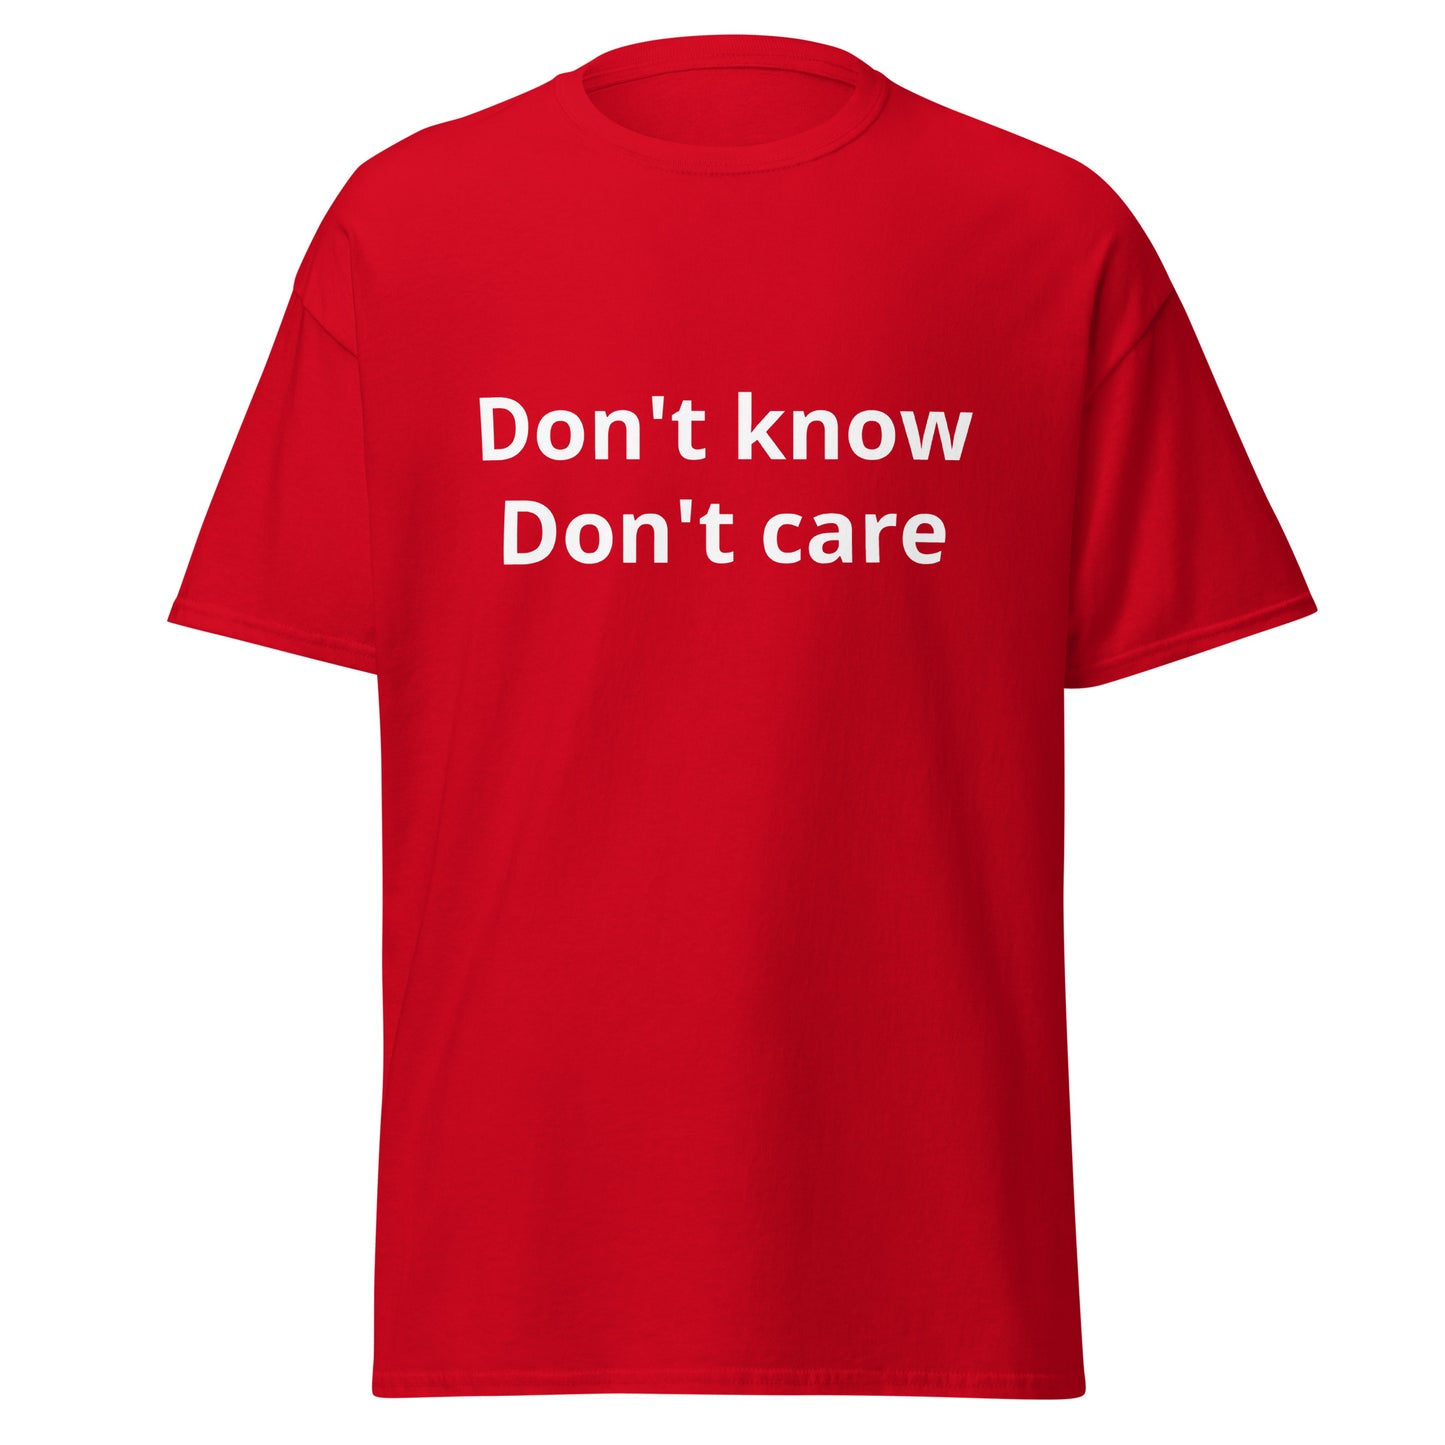 Don’t know don’t care funny shirt for men